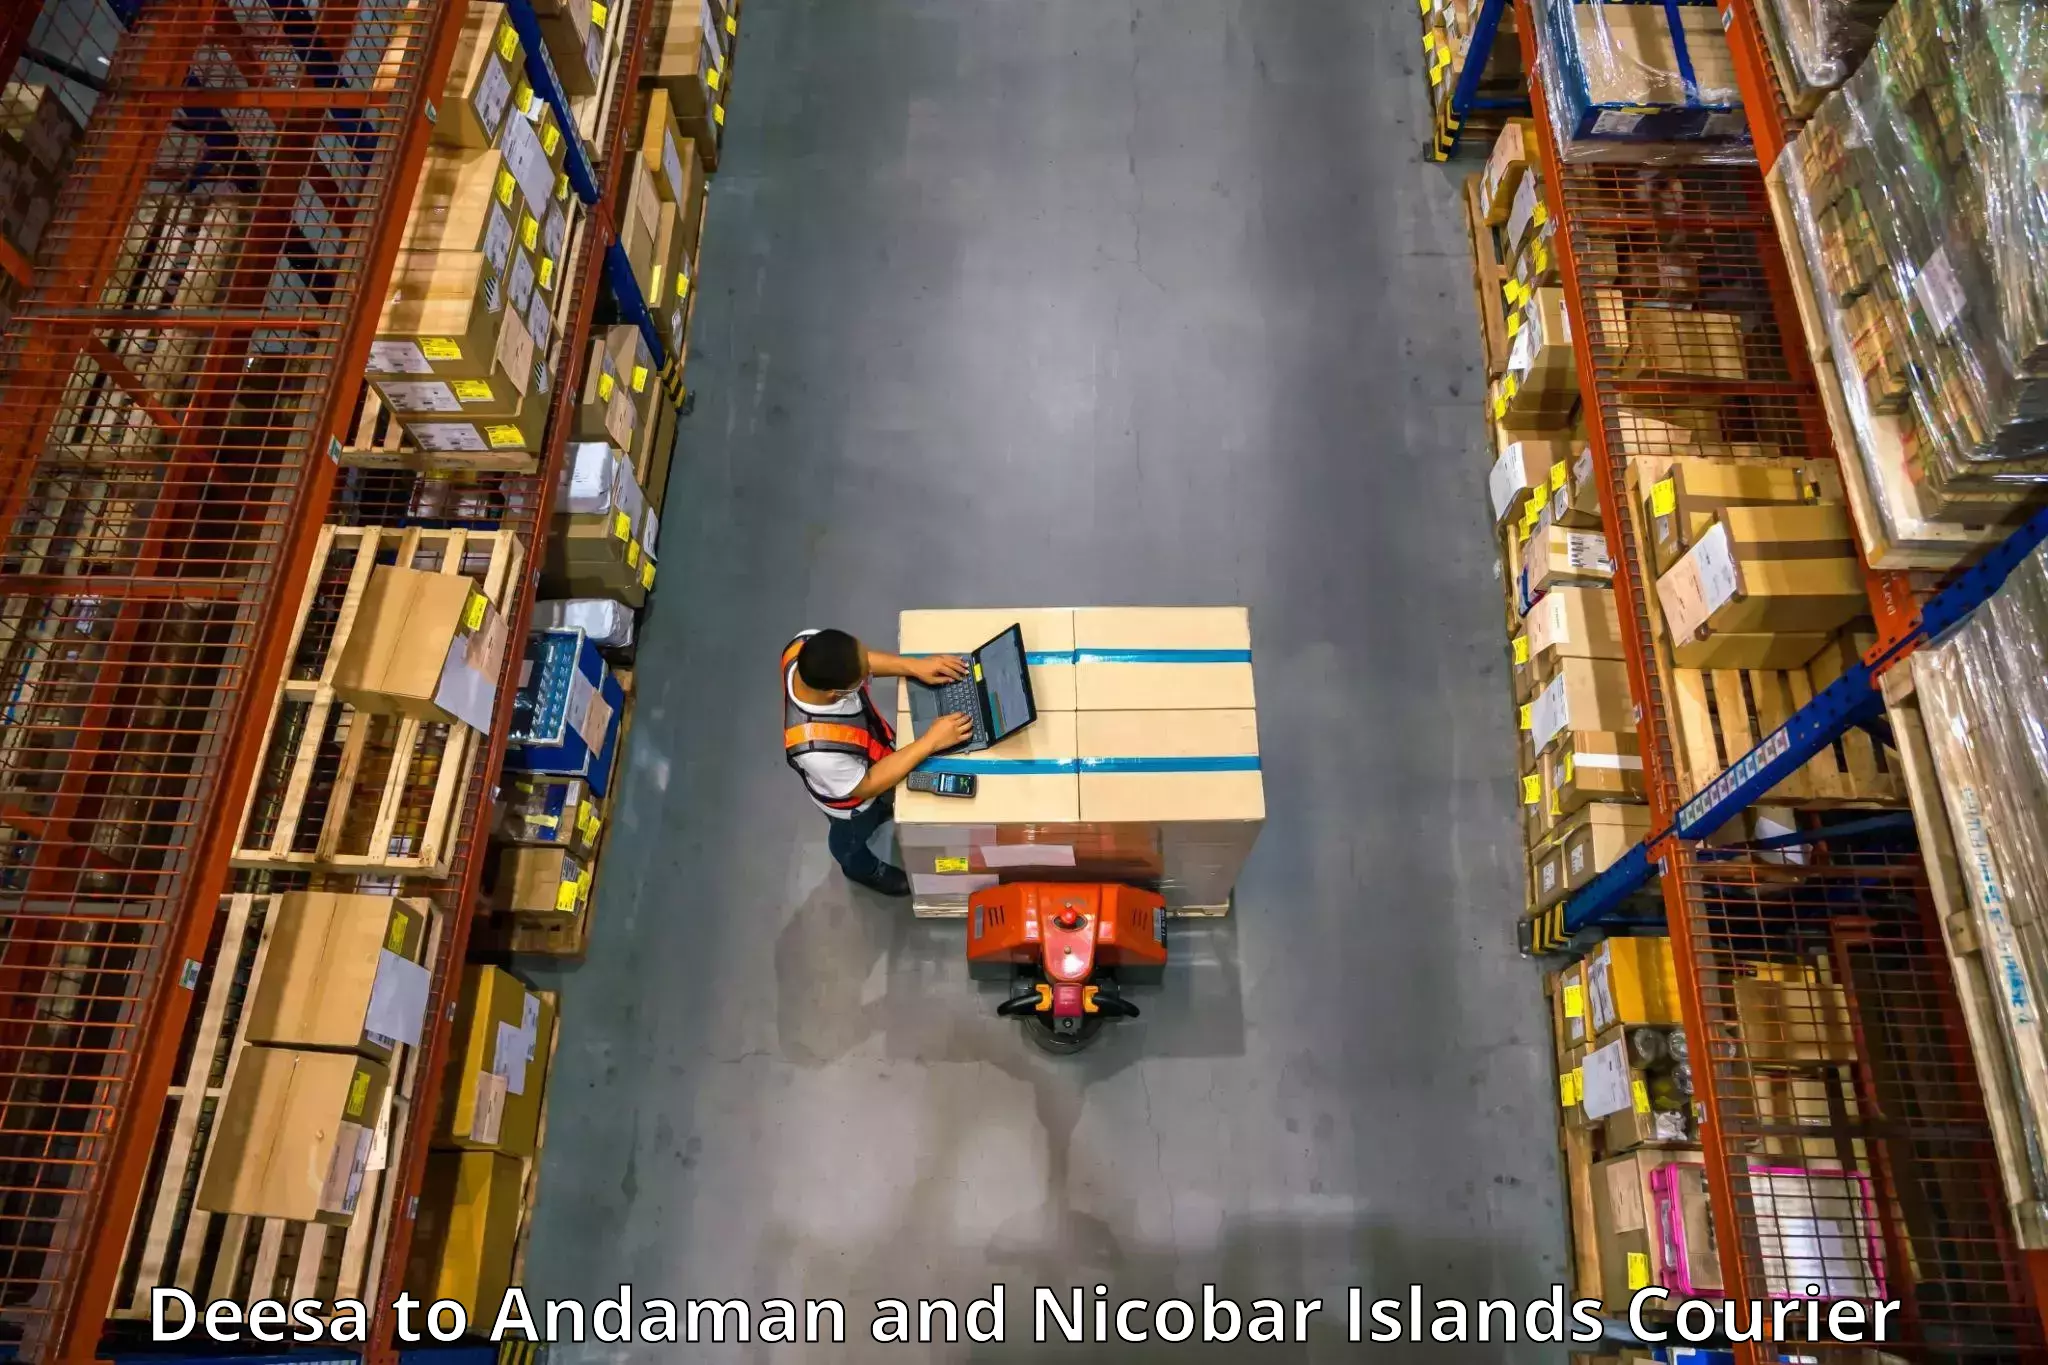 Furniture delivery service Deesa to Andaman and Nicobar Islands